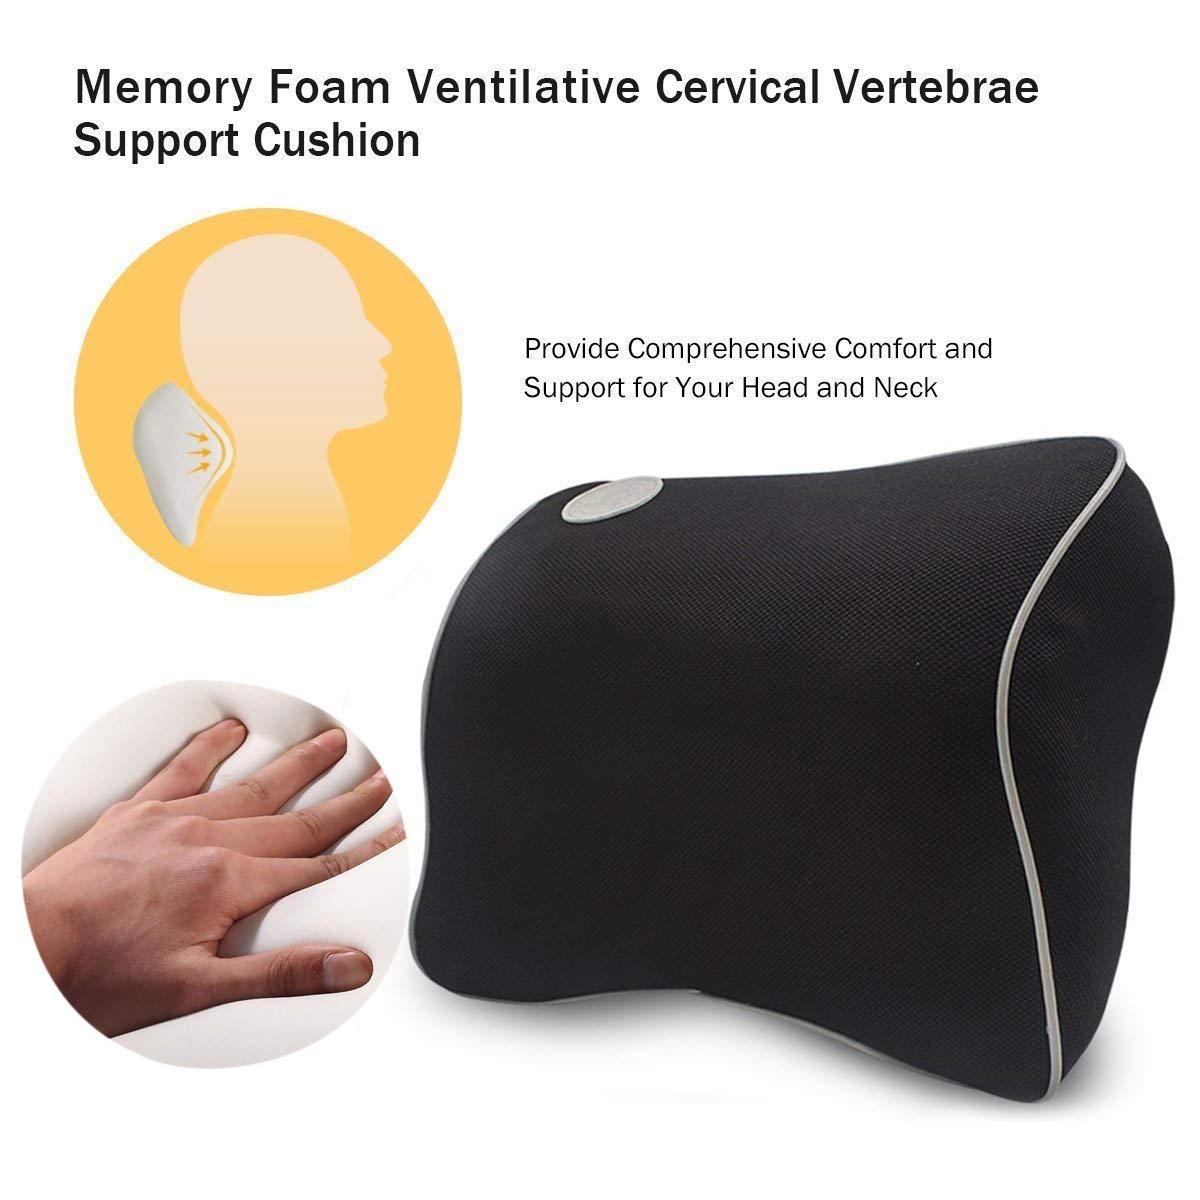 Memory Foam Car Headrest Pillow for Neck Support/Adjust Sitting Position/Pain Relief (Black)